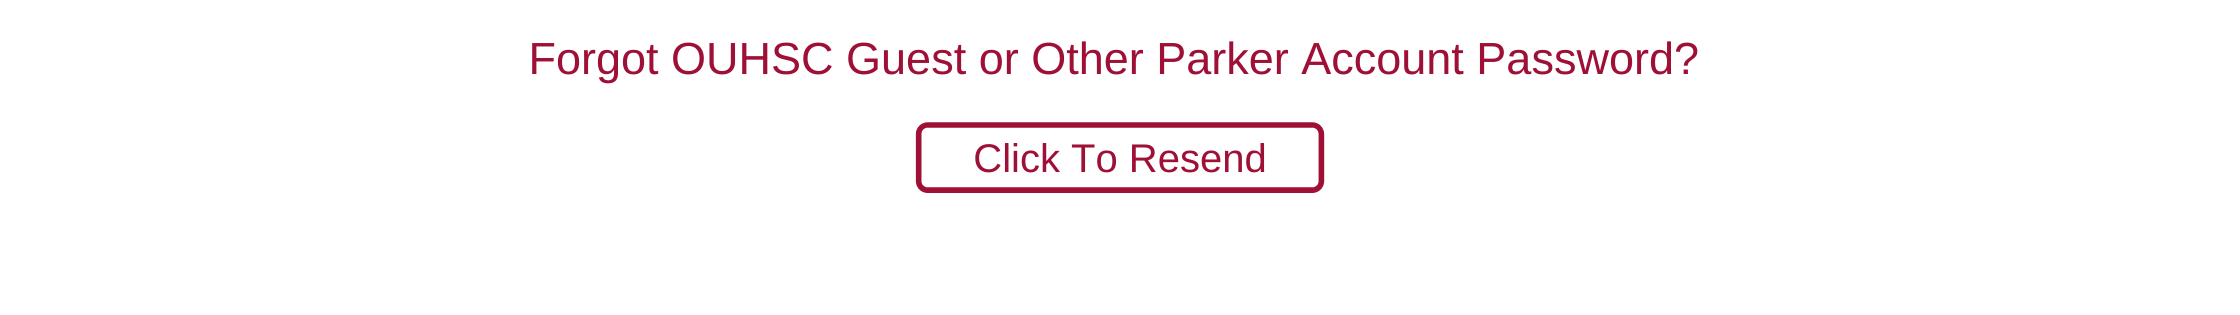 OUHSC Guest Or Other Parker Account Recovery